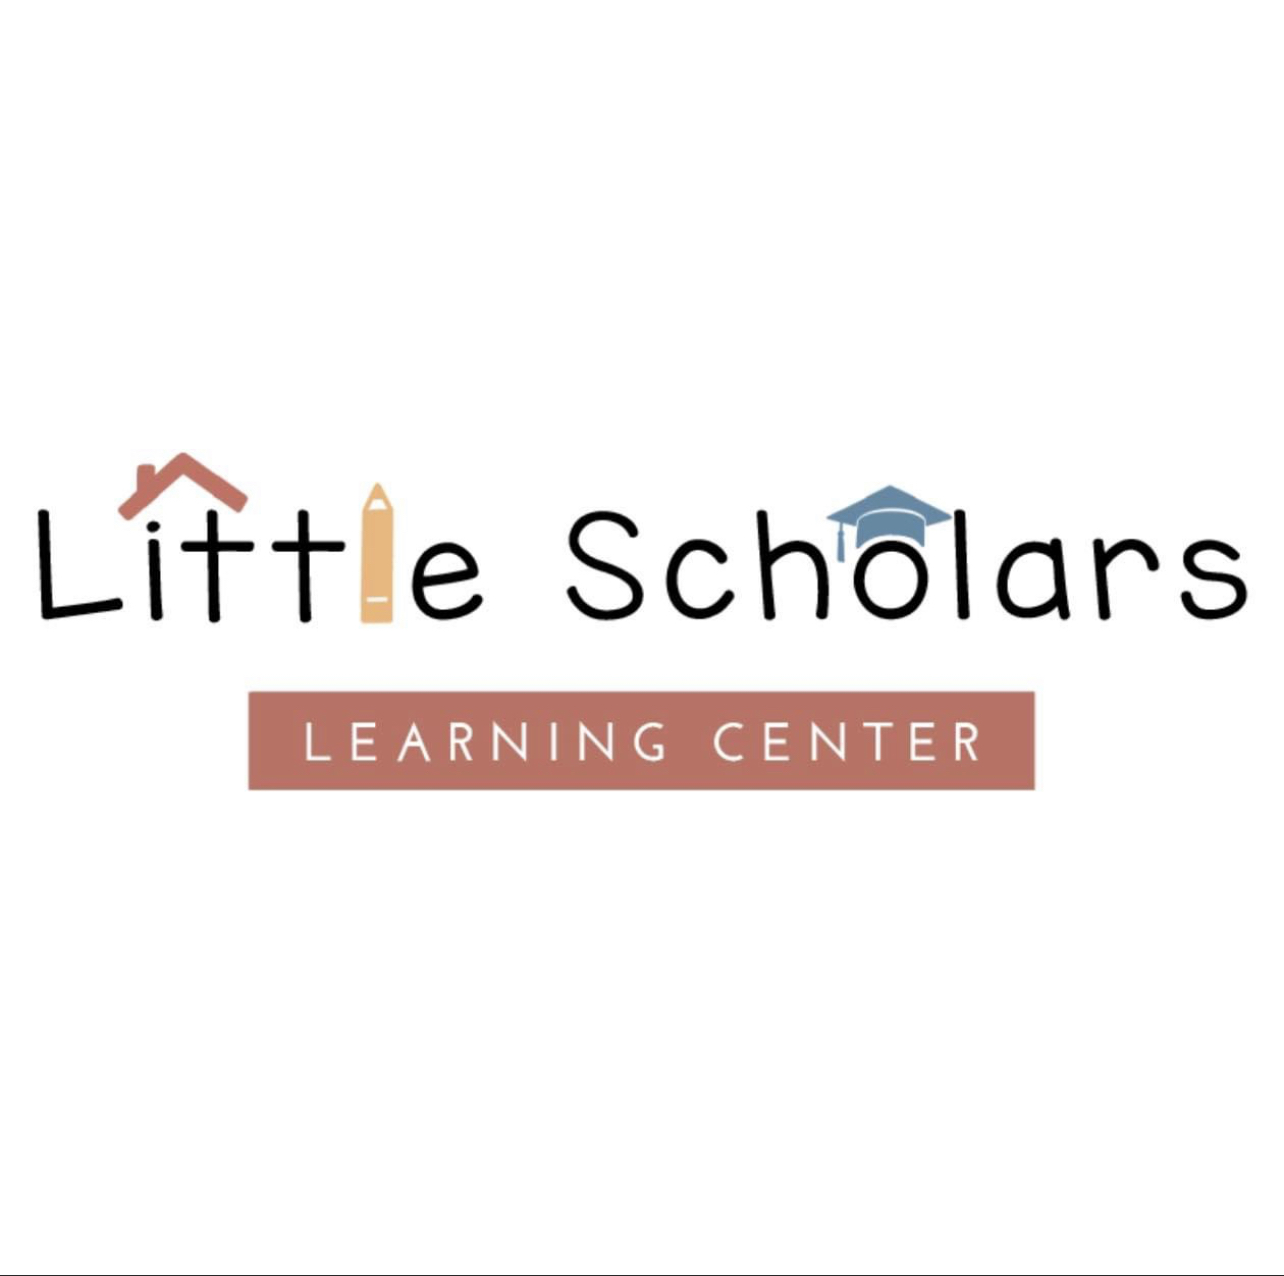 Little Scholars Learning Center North